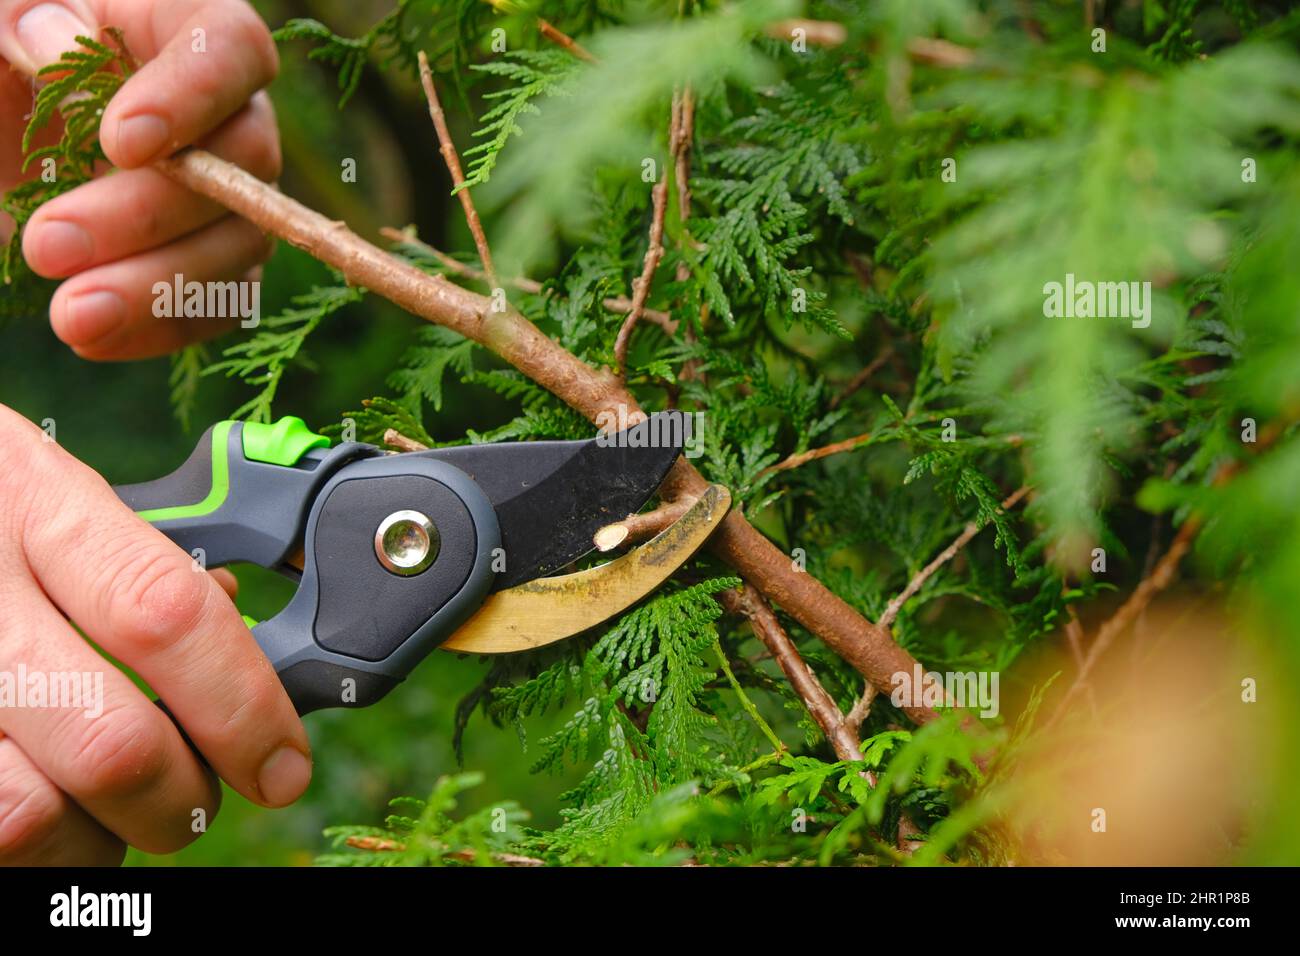 Plants Pruning Tool. Garden shears in hands close-up cutting a hedge.Plant pruning.Gardening and plant formation.Gardening and farming tools Stock Photo